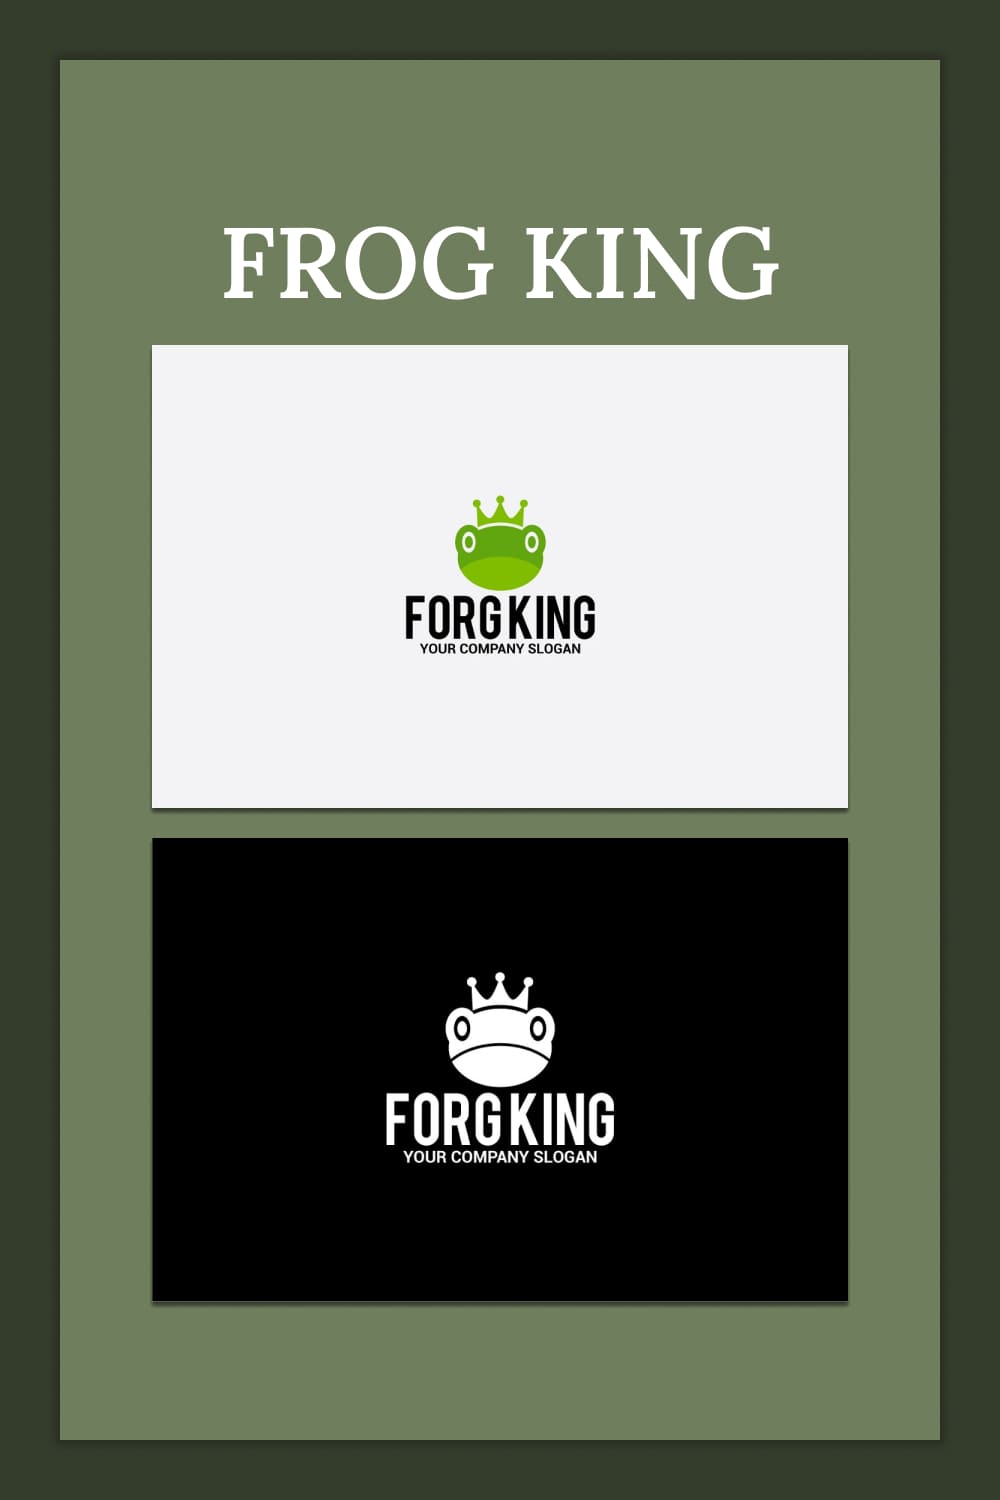 Frog king - pinterest image preview.